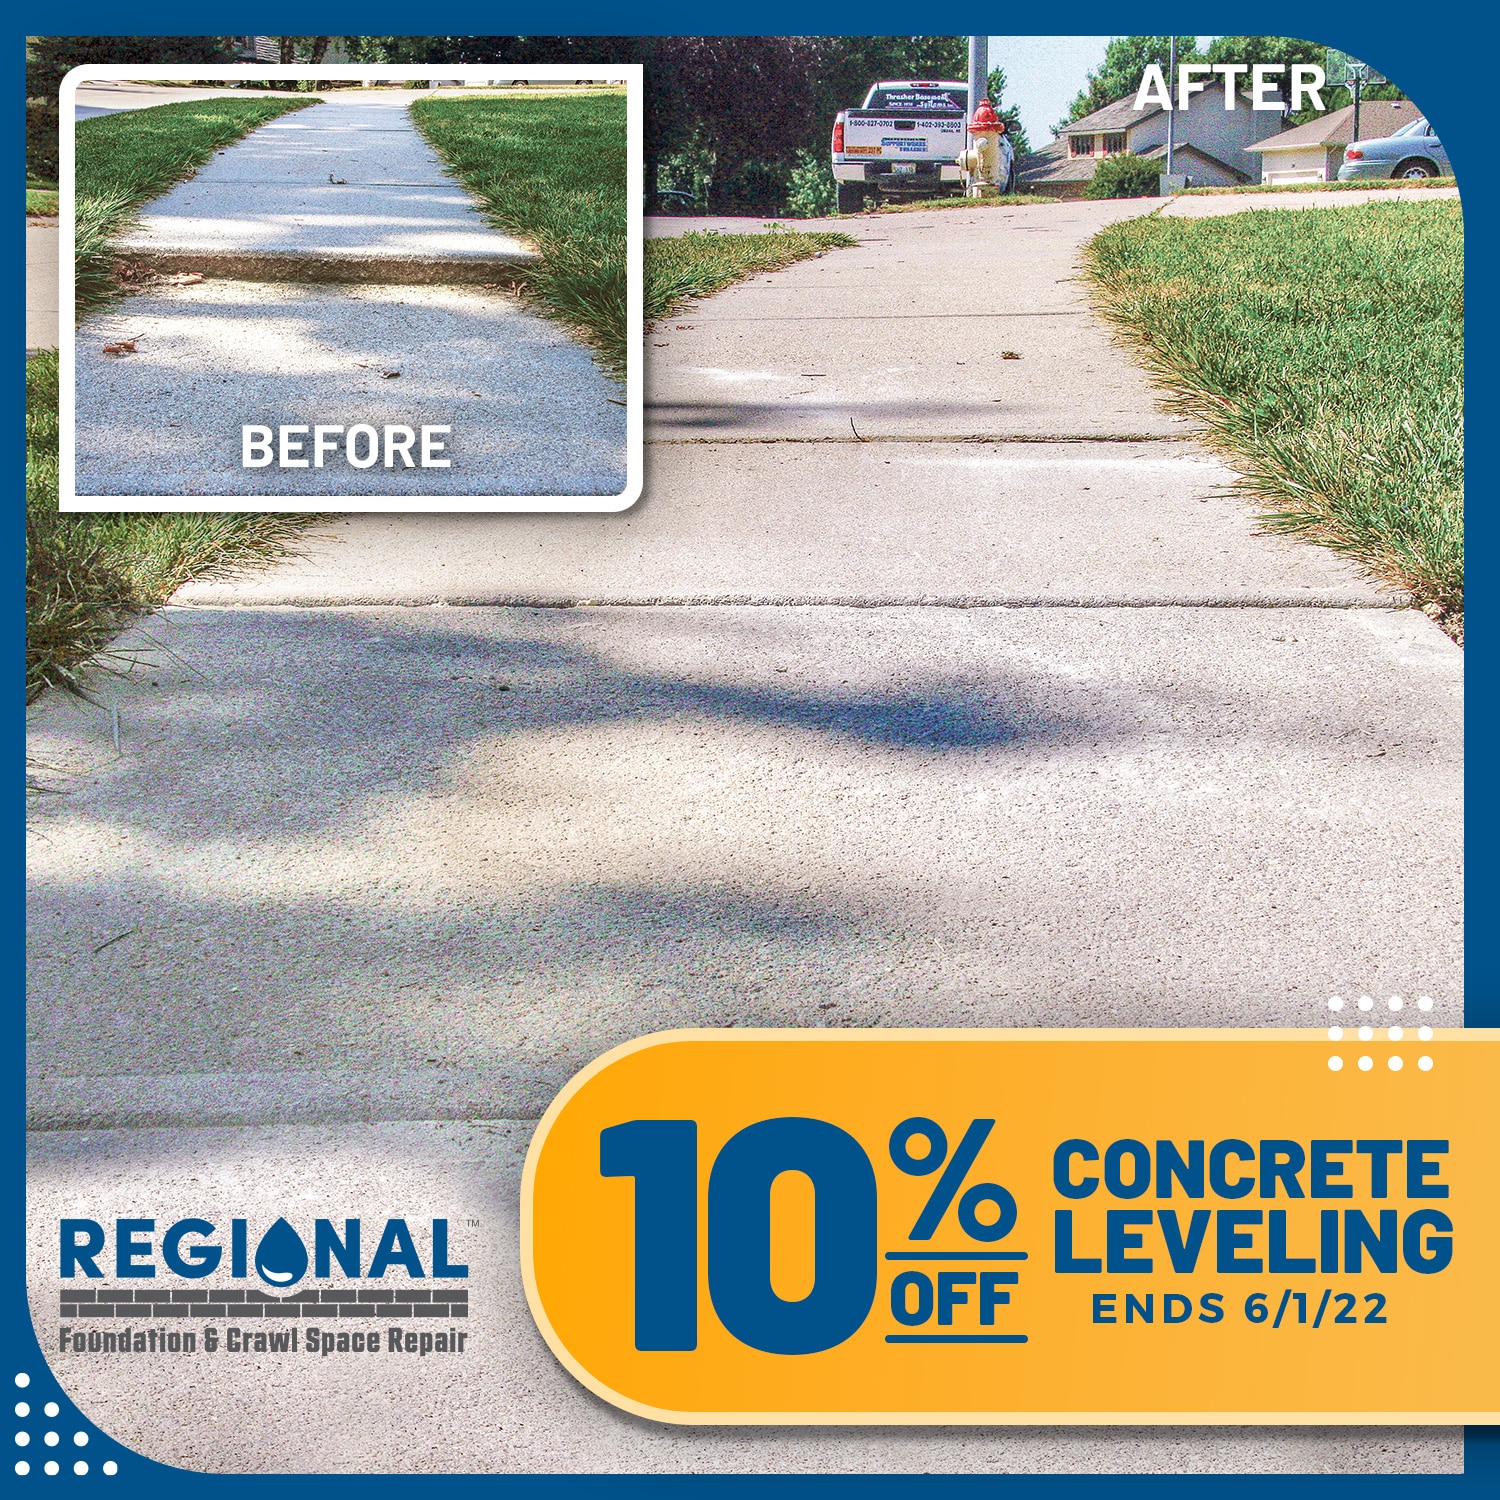 10% Off Concrete Leveling - Ends 6/1/22